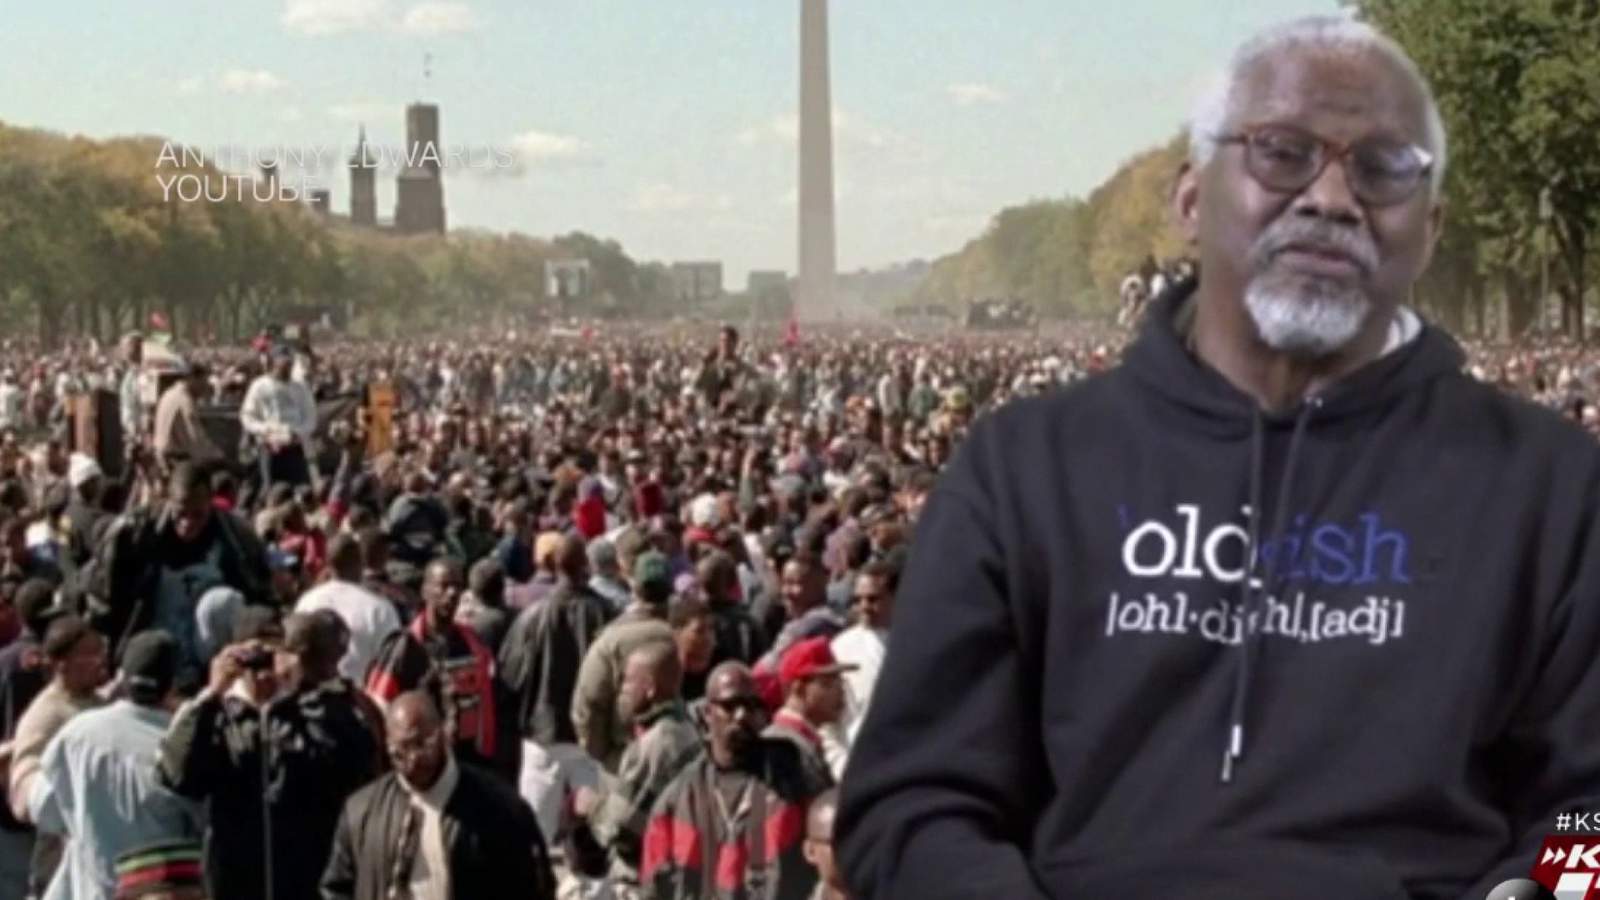 Two brothers reflect on Million Man March 25th anniversary through documentary